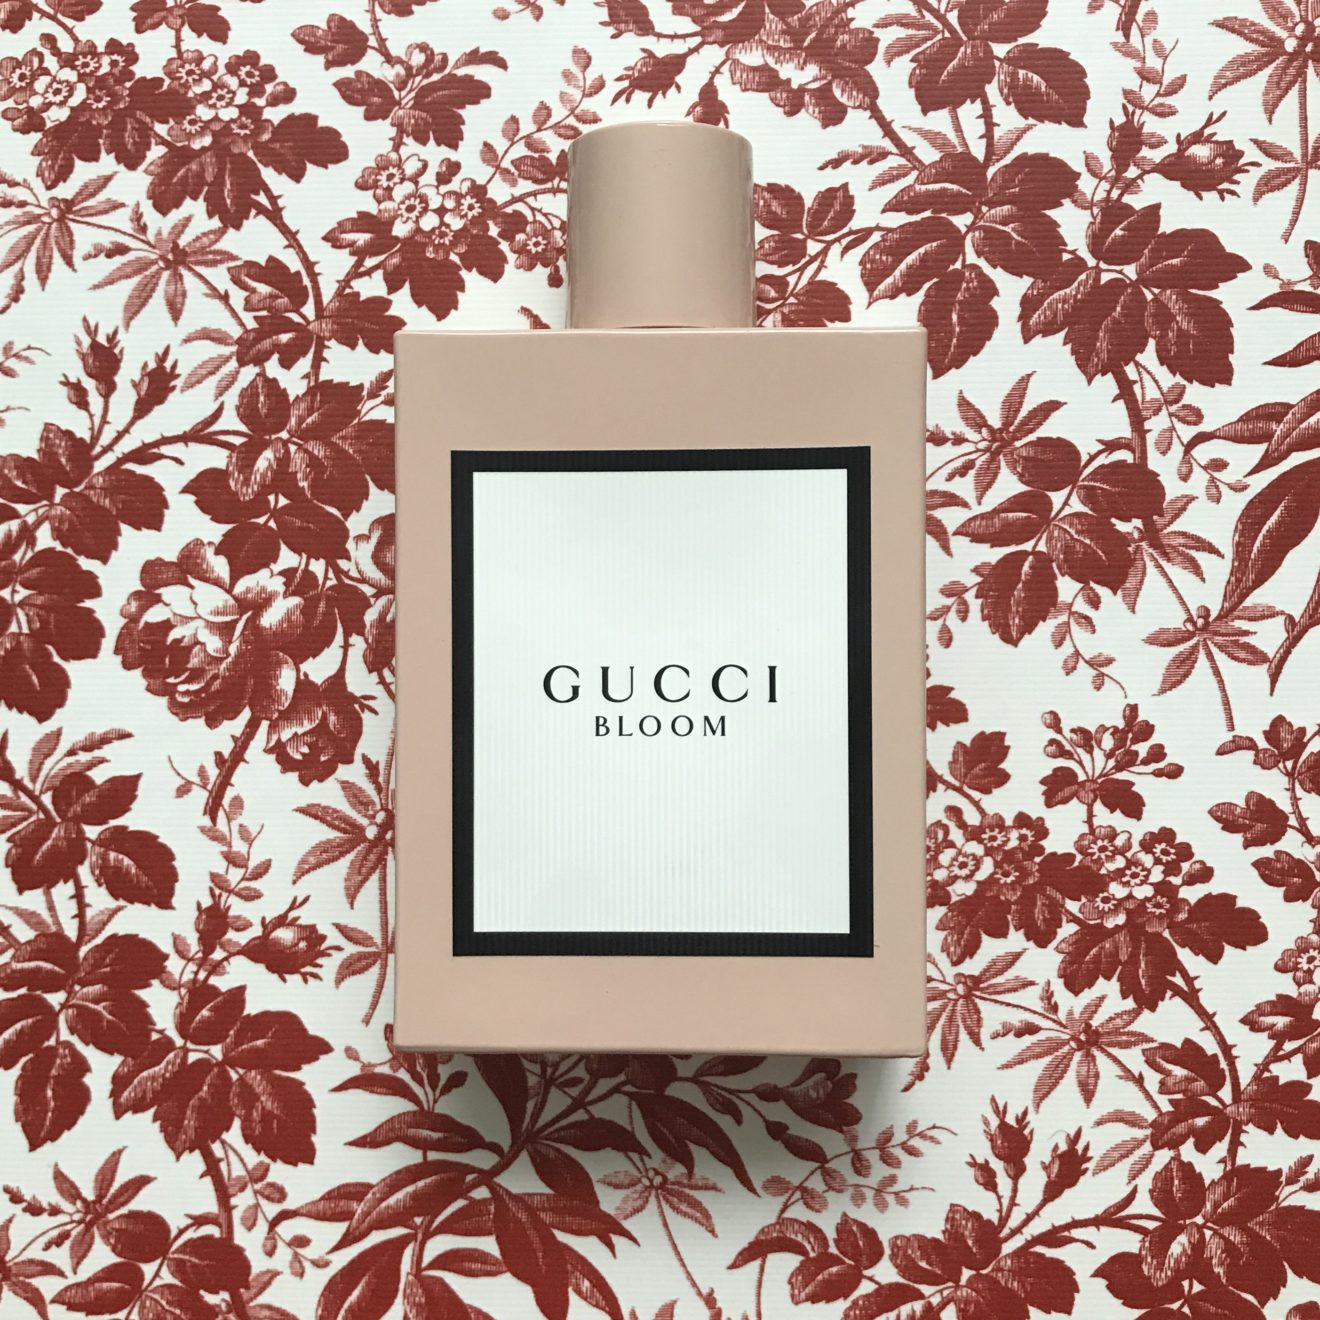 Gucci Bloom Smells Like Skin Kissed By Flowers